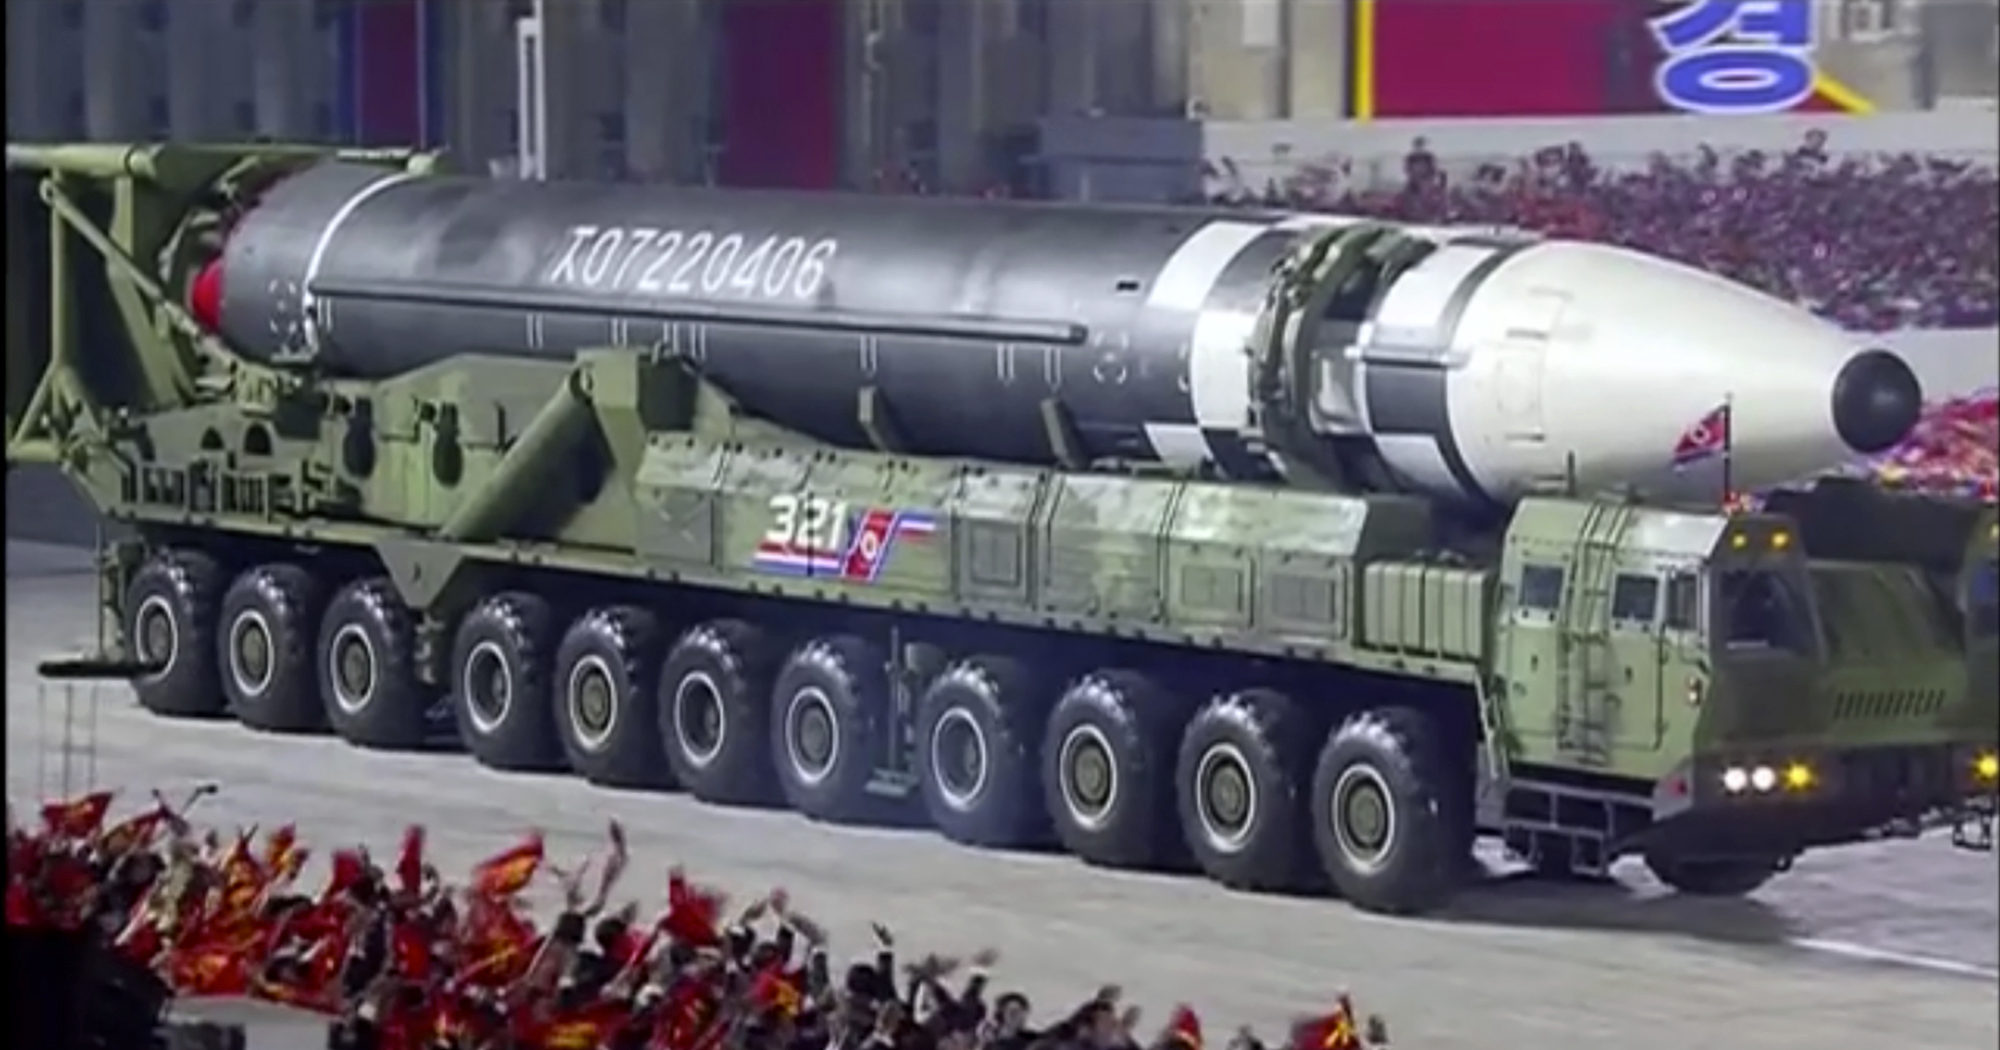 This image taken from video shows a military parade with what appears to be a new intercontinental ballistic missile in Pyongyang, North Korea, on Oct. 10, 2020.